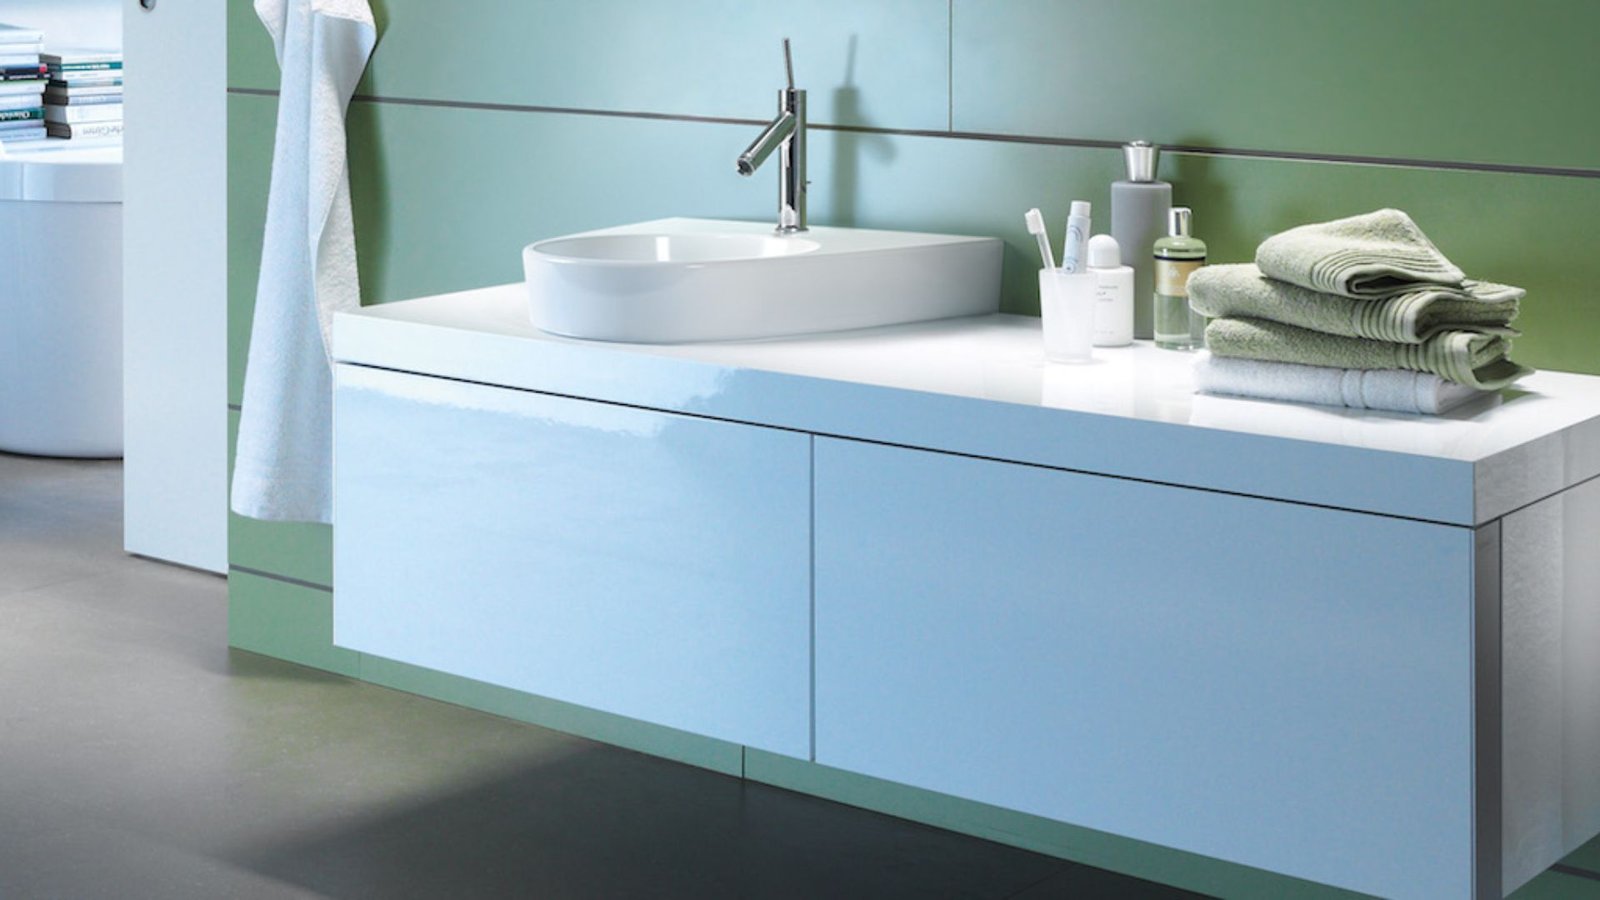 Innovative Features in High-End Wash Basins